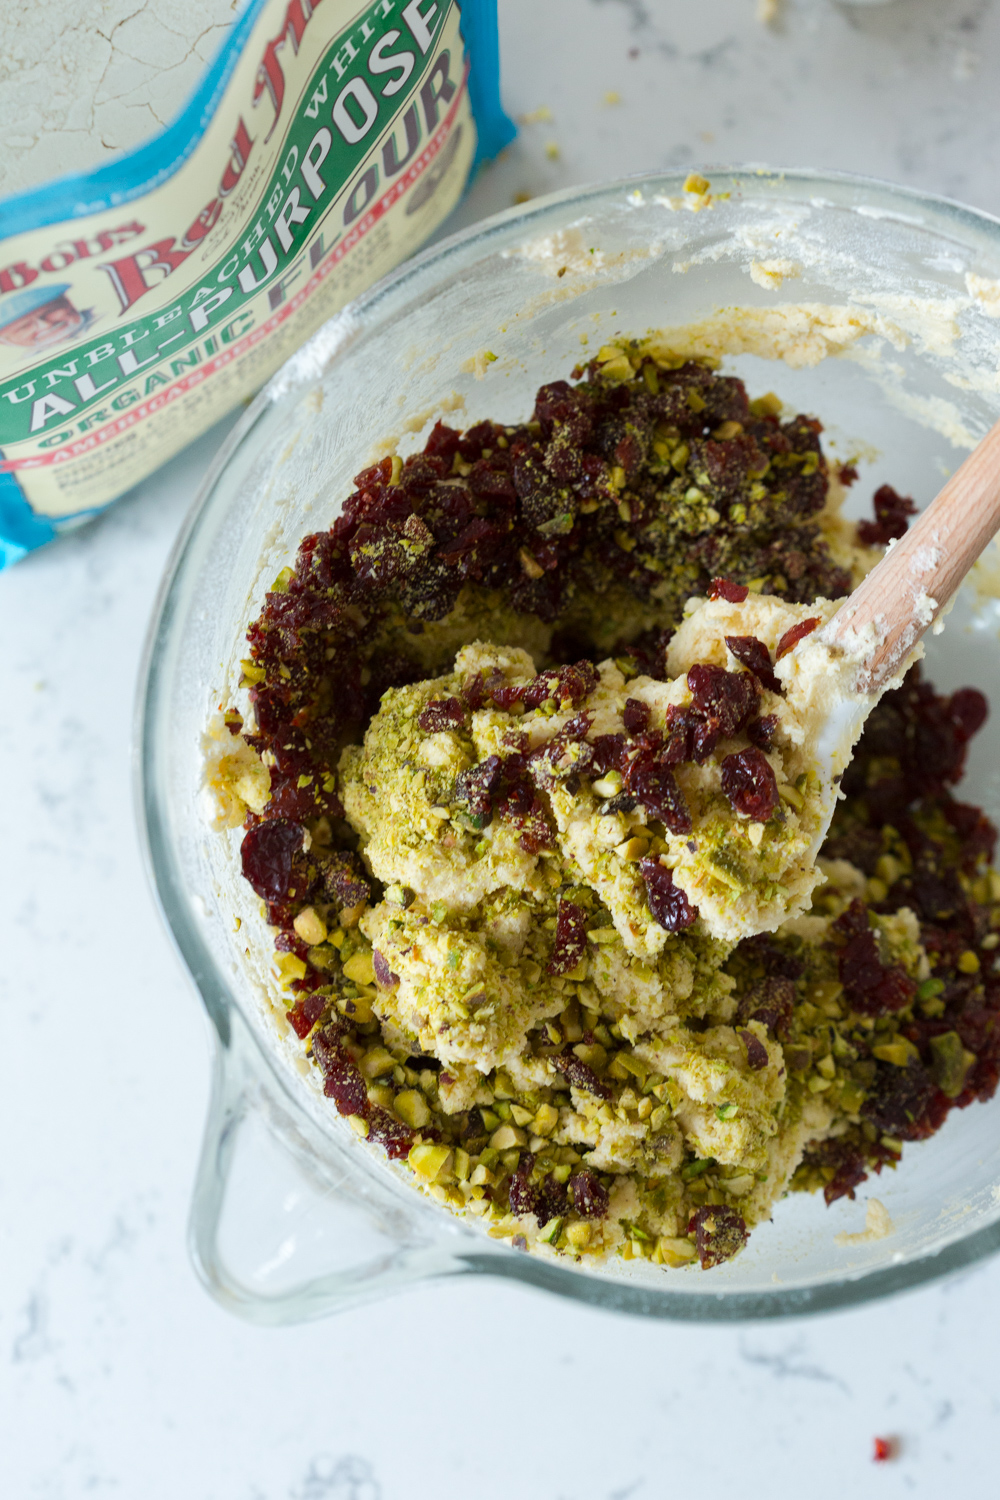 Cherry Pistachio and White Chocolate Shortbread Cookies dough mixing